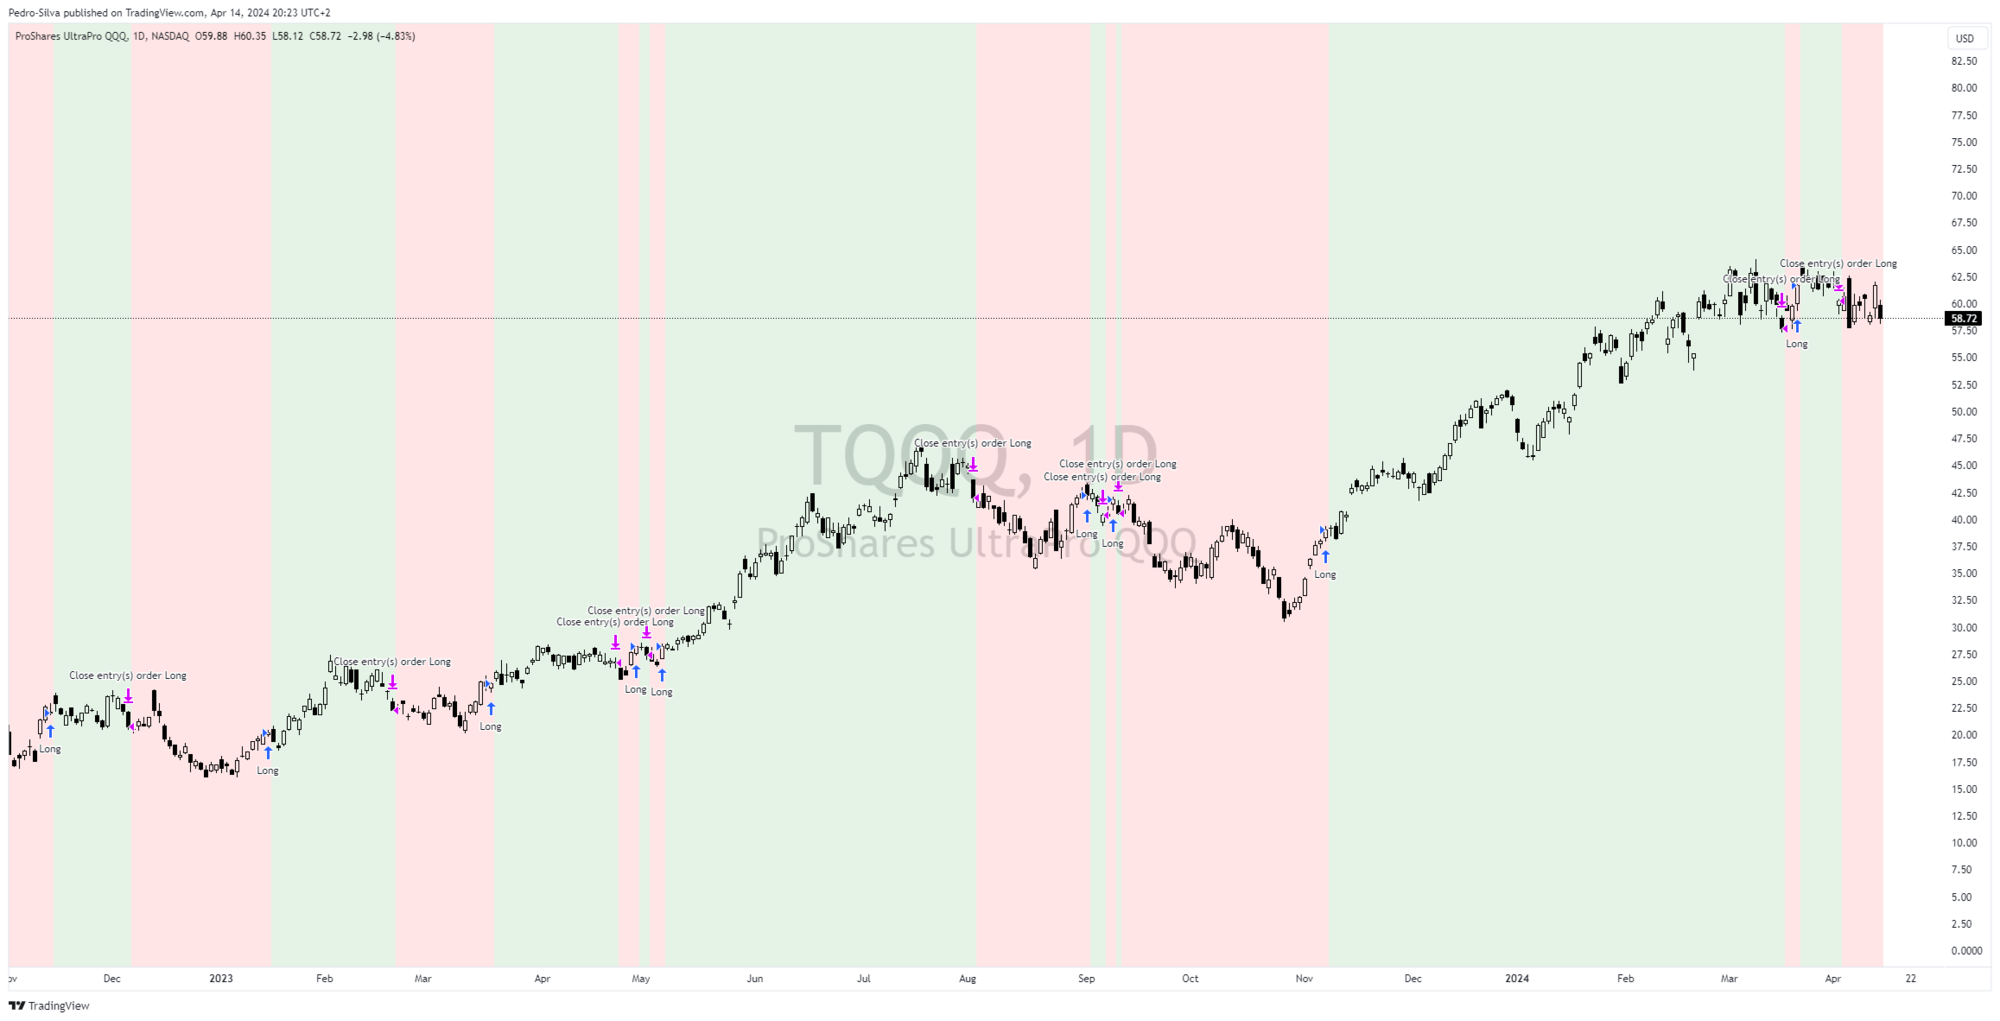 Chart of TQQQ ETF showing that Alpha Signals strategy remains on red signal.